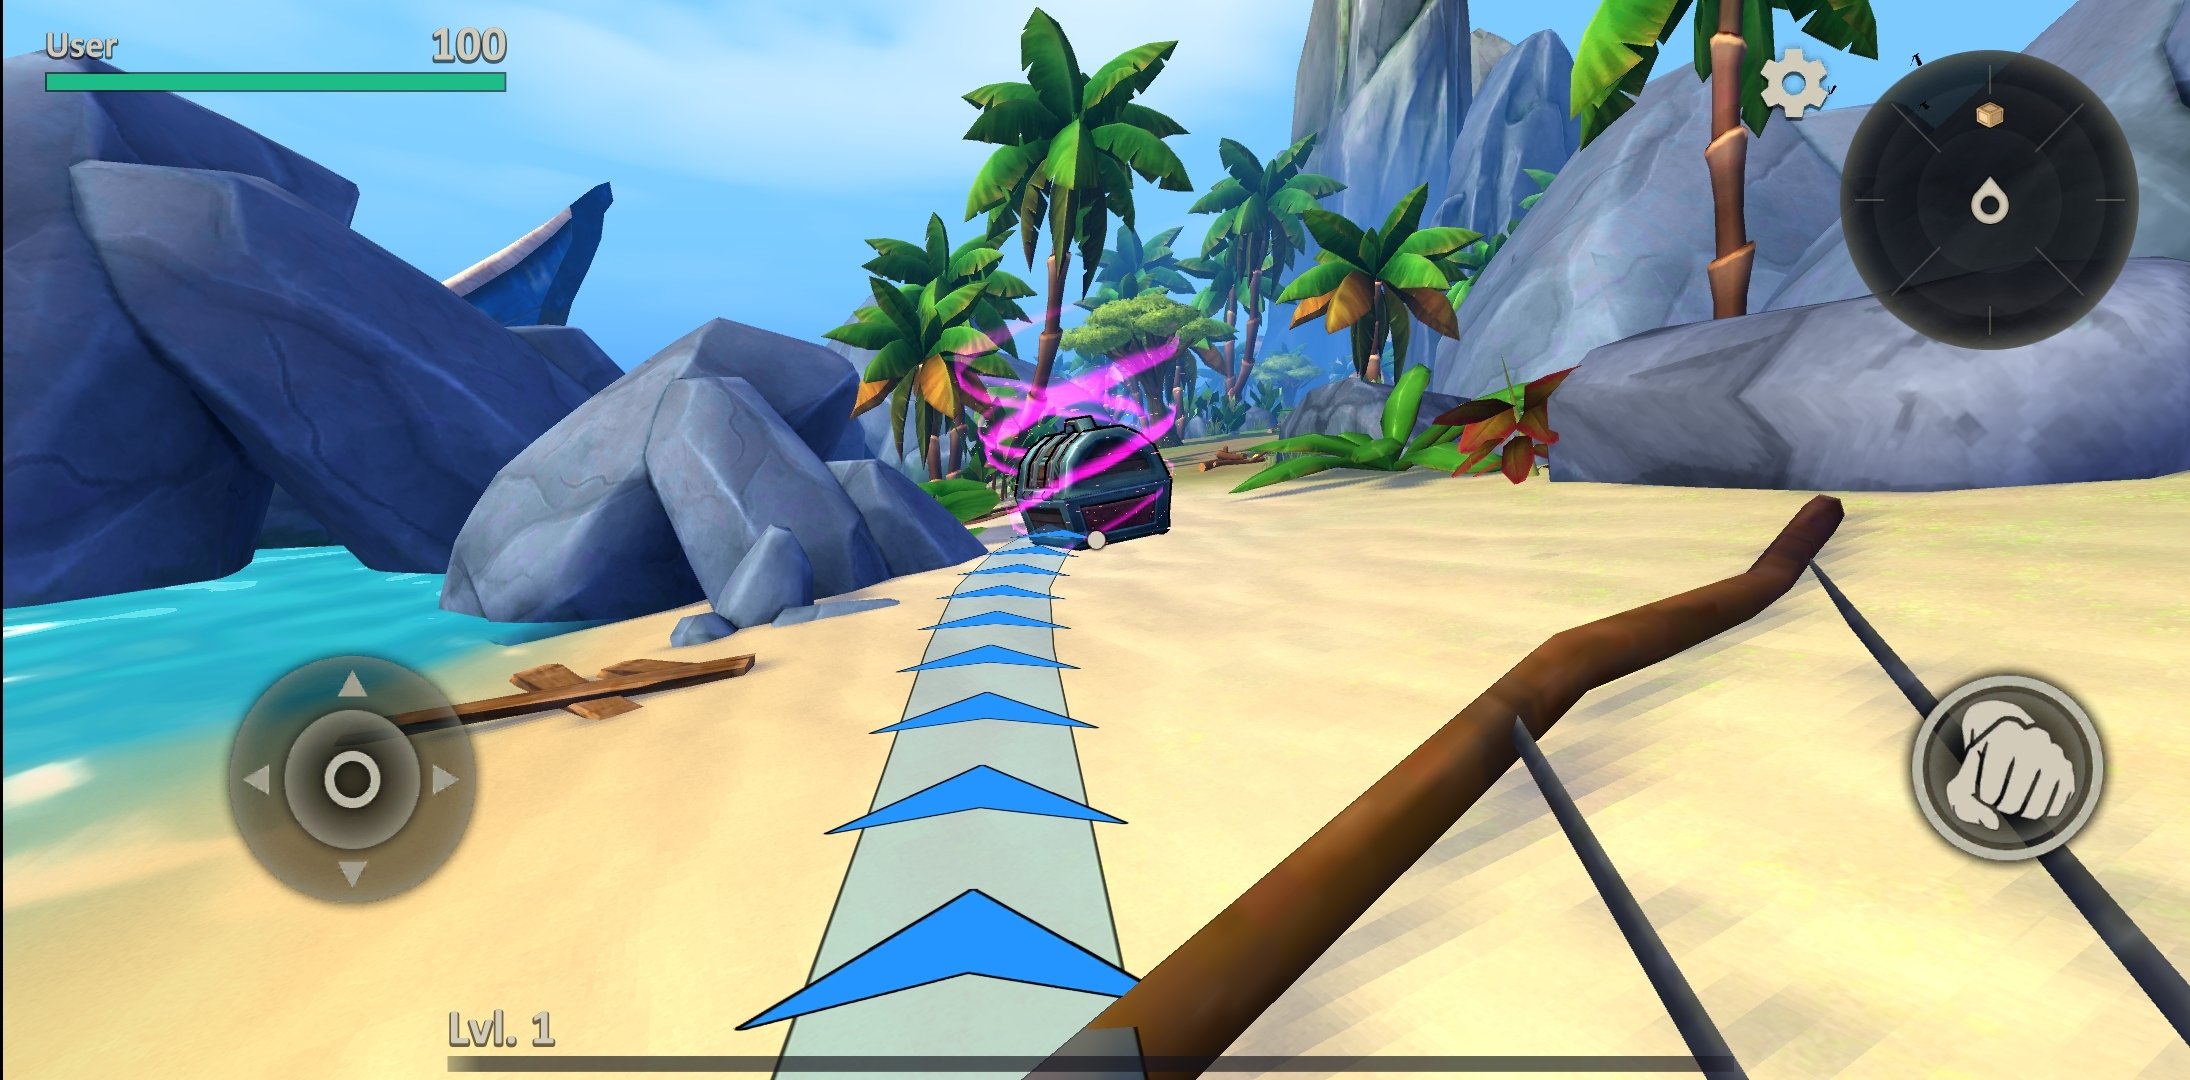 Survival Island Evo 2 3 247 Download For Android Apk Free - isla brawl stars fortnite witg arms